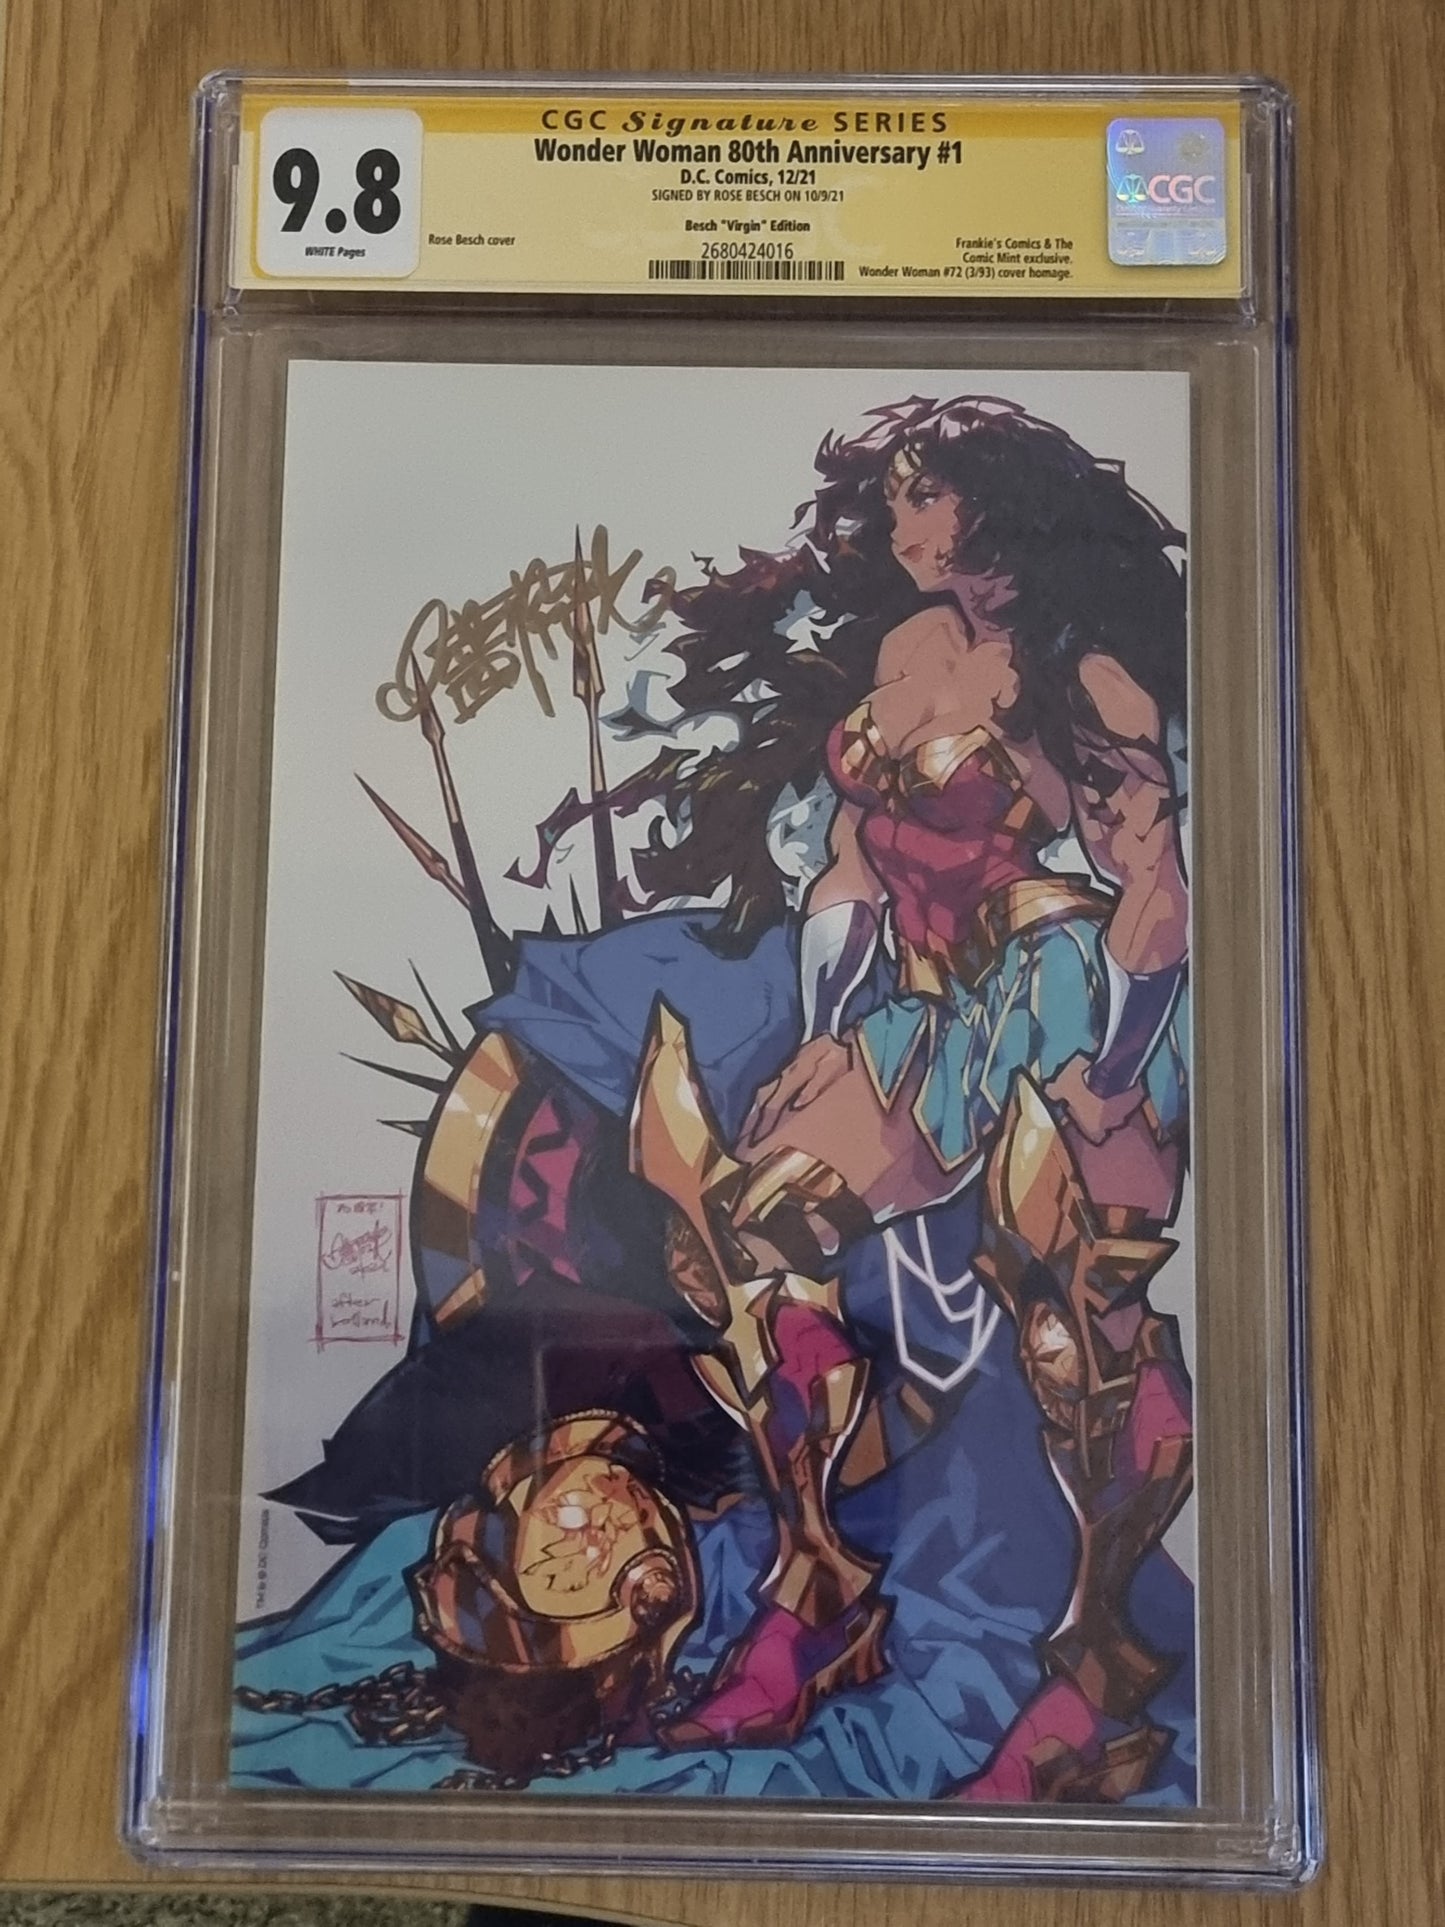 WONDER WOMAN 80TH ANNIVERSARY ROSE BESCH NYCC VIRGIN VARIANT LIMITED TO 1000 WITH COA CGC 9.8 SS